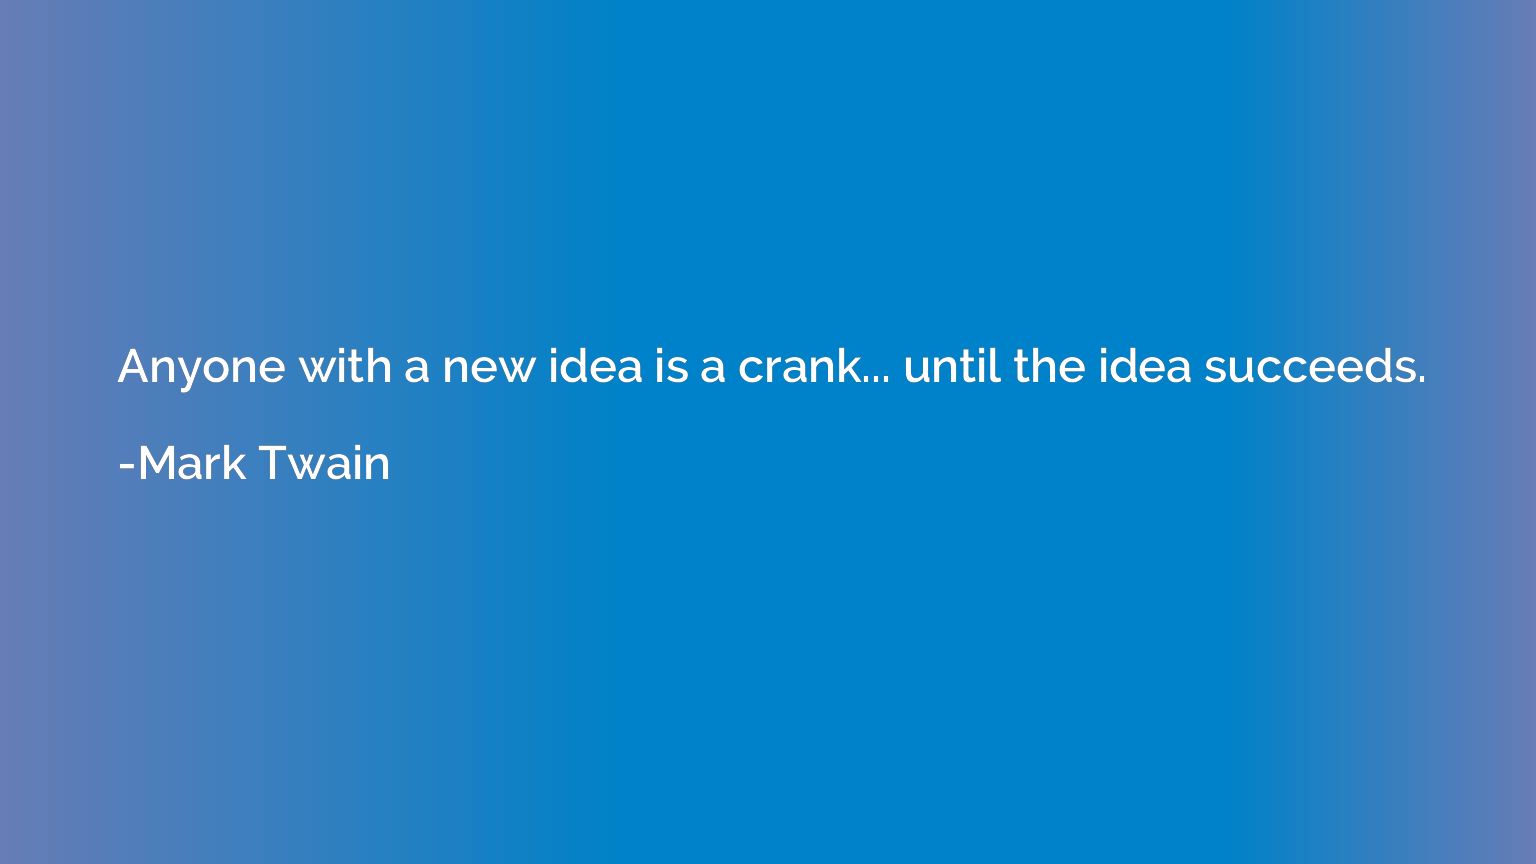 Anyone with a new idea is a crank... until the idea succeeds